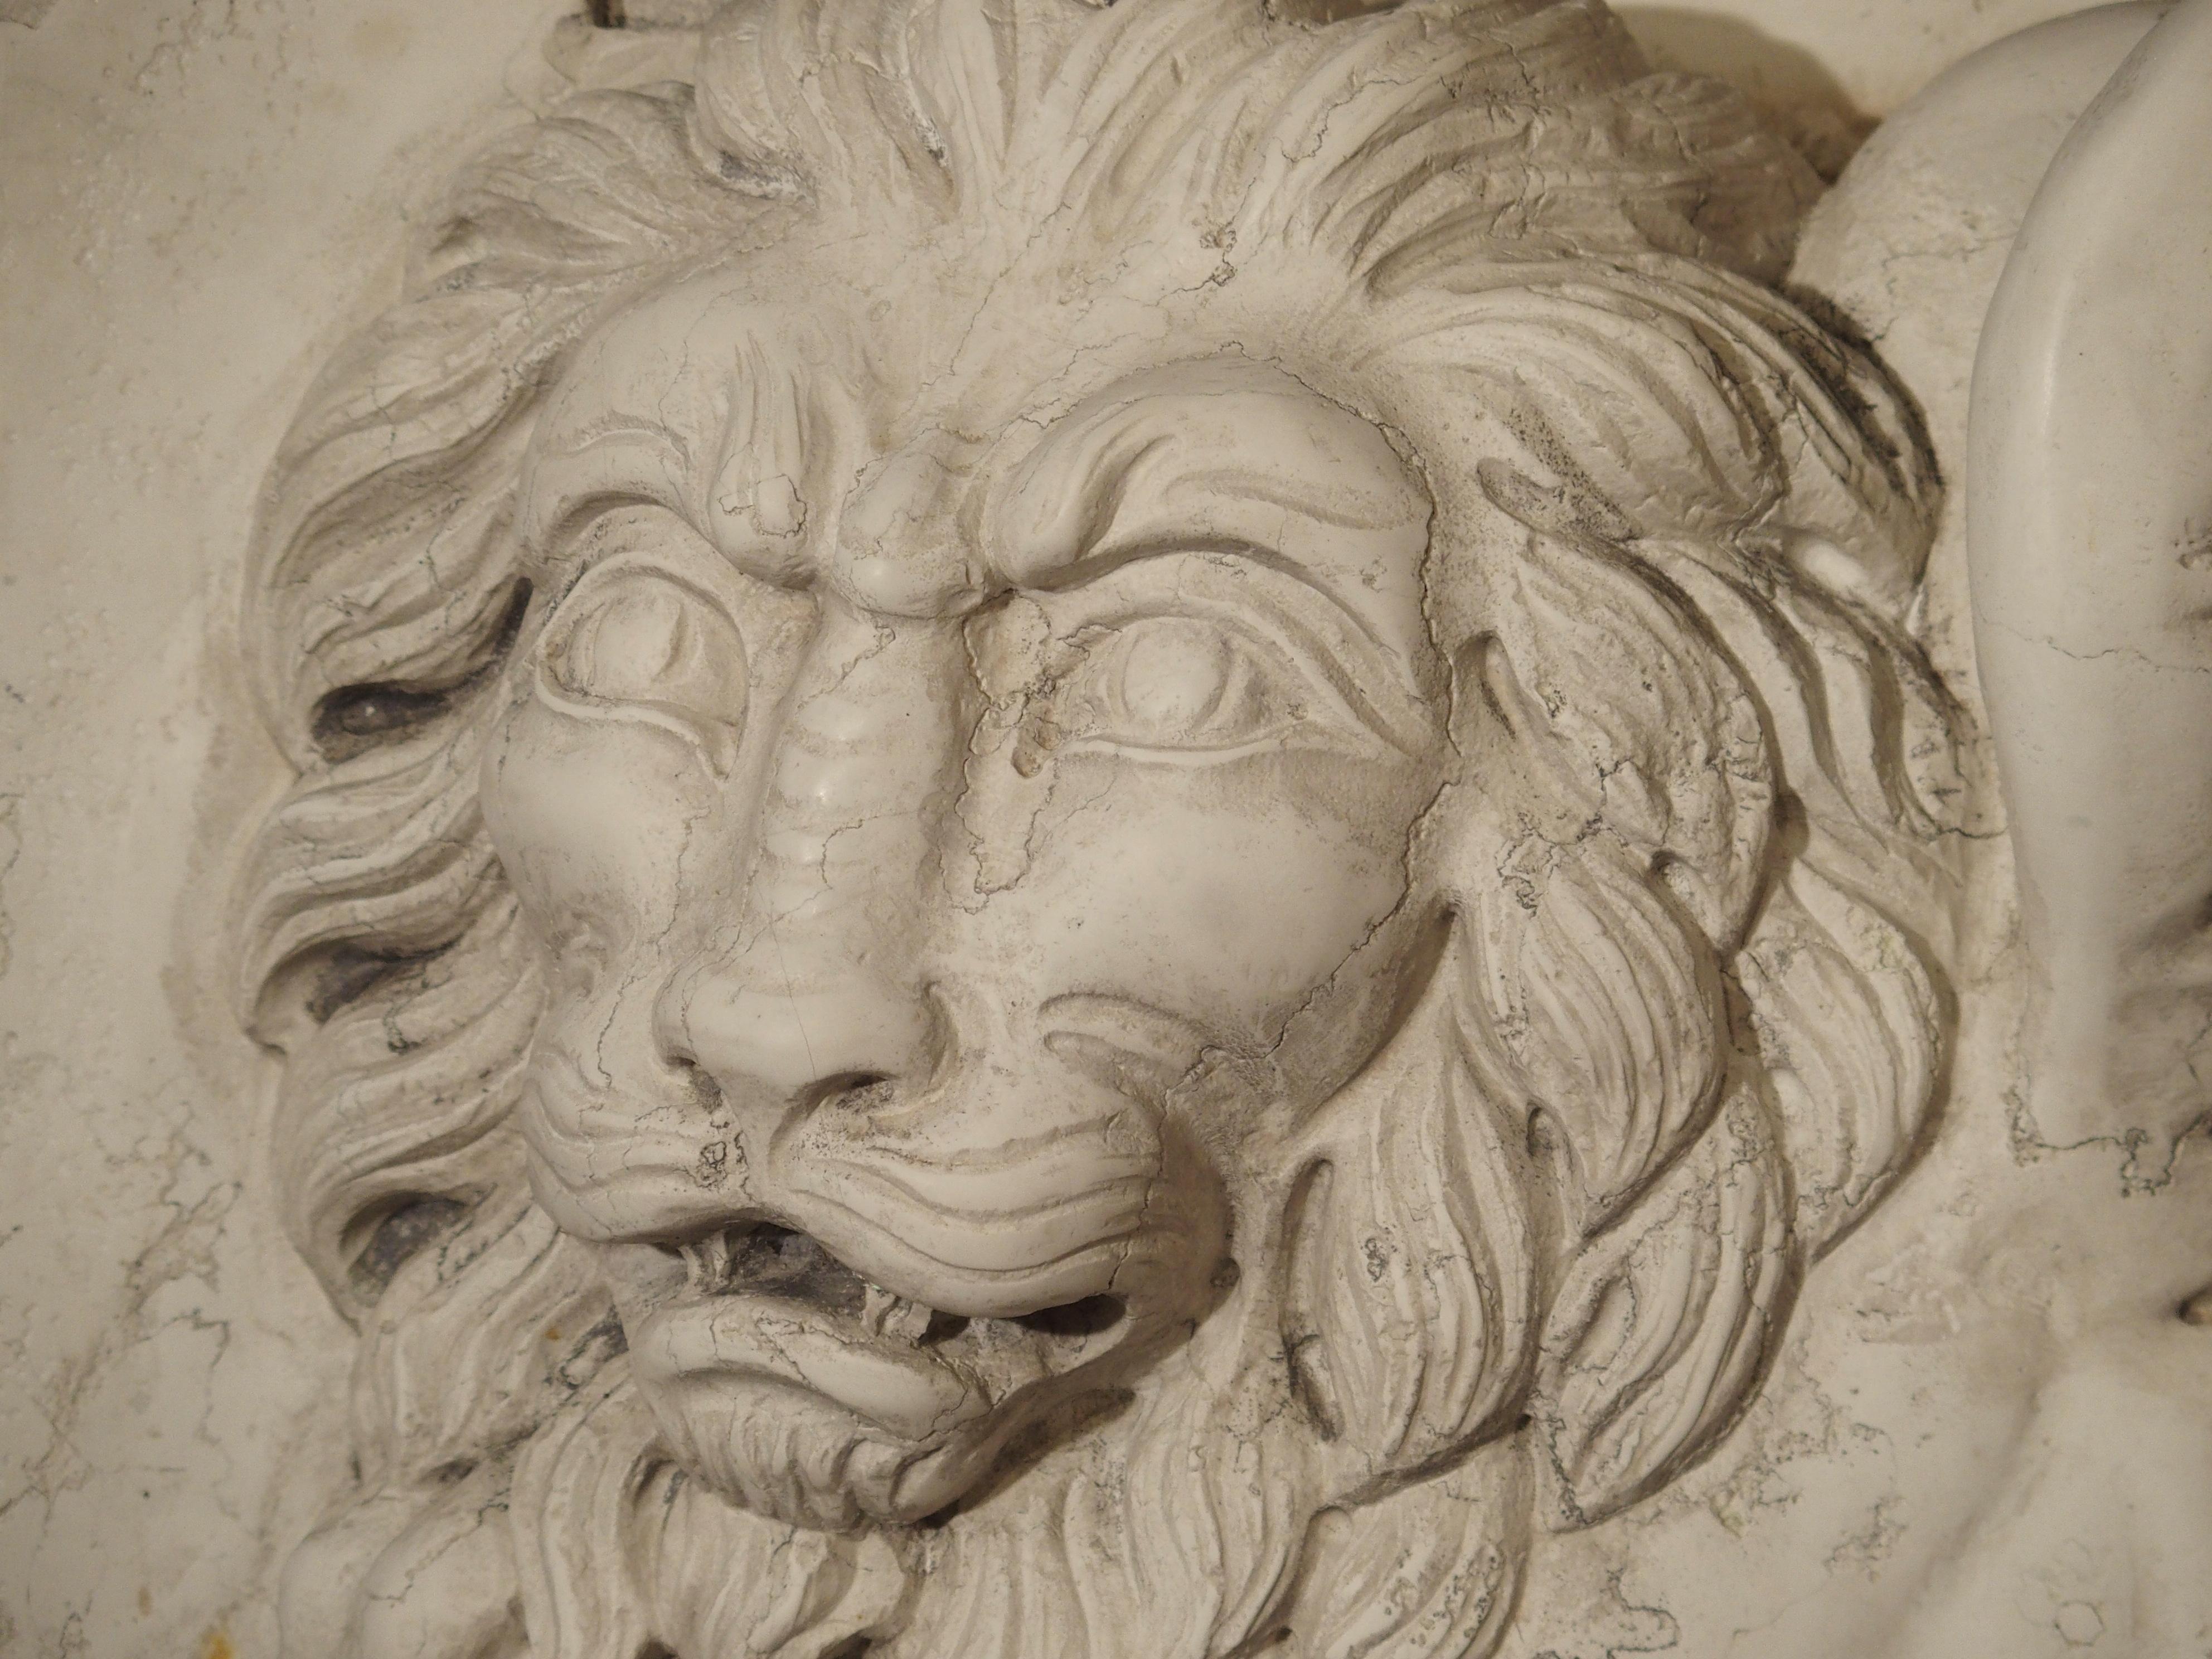 This stunning white marble bas relief plaque was hand carved in Italy. The winged lion of Venice is the symbol of the city of Venice, formerly of the Republic of Venice, and also the lion is the attribute of St. Mark, who was the patron saint of the